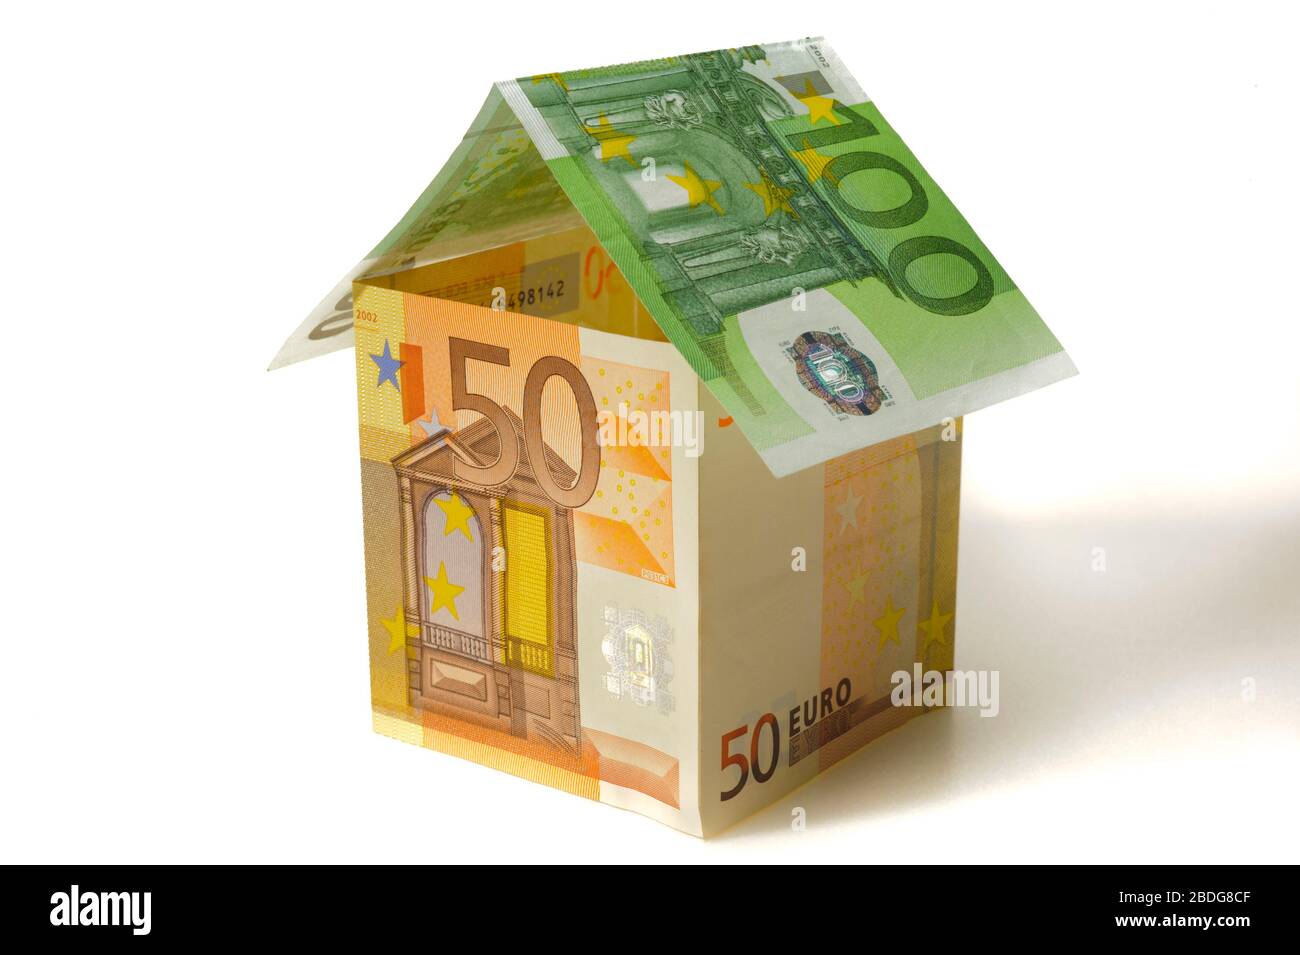 model house made with banknotes of Euor currency Stock Photo